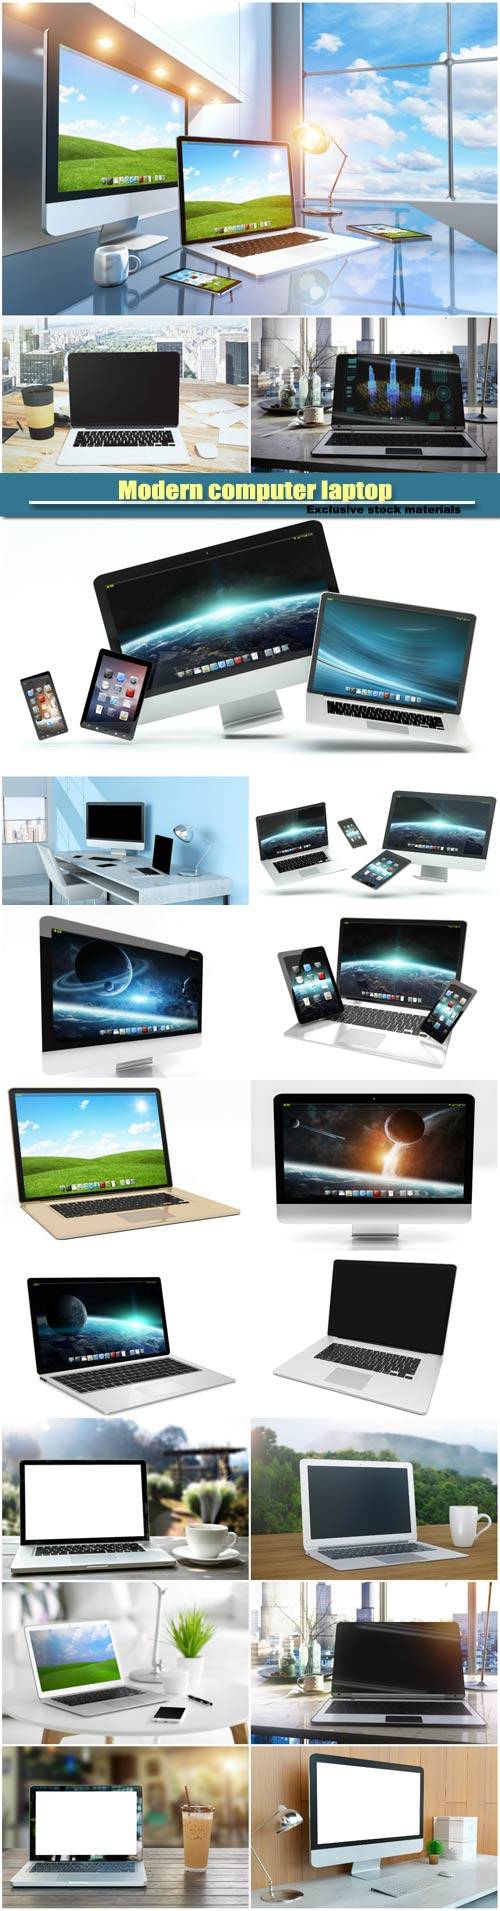 Modern computer laptop, mobile phone and tablet floating